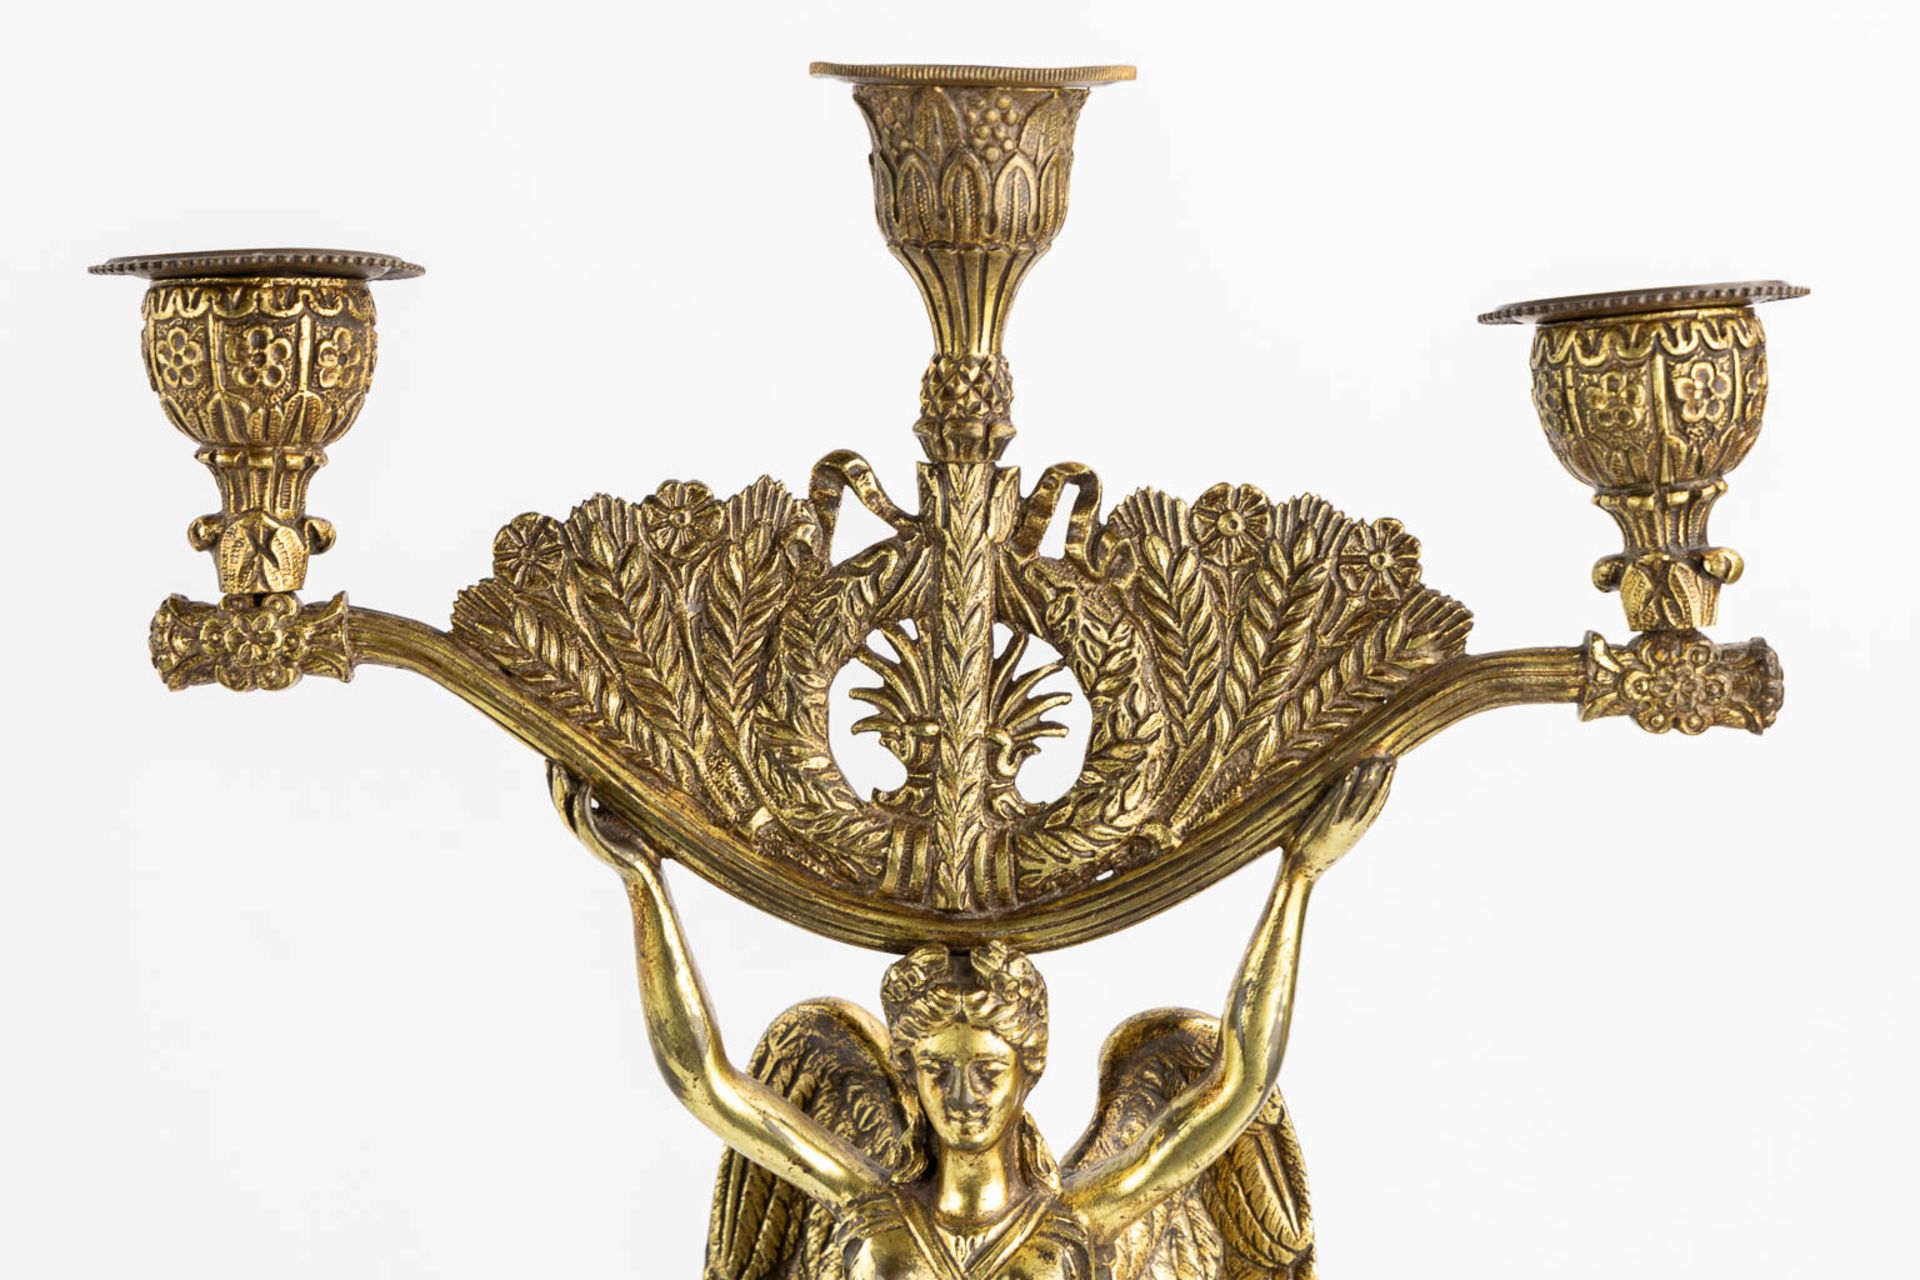 Two pairs of candelabra, bronze and cloisonné, Empire and Louis XVI style. (H:49 x D:26 cm) - Image 18 of 18